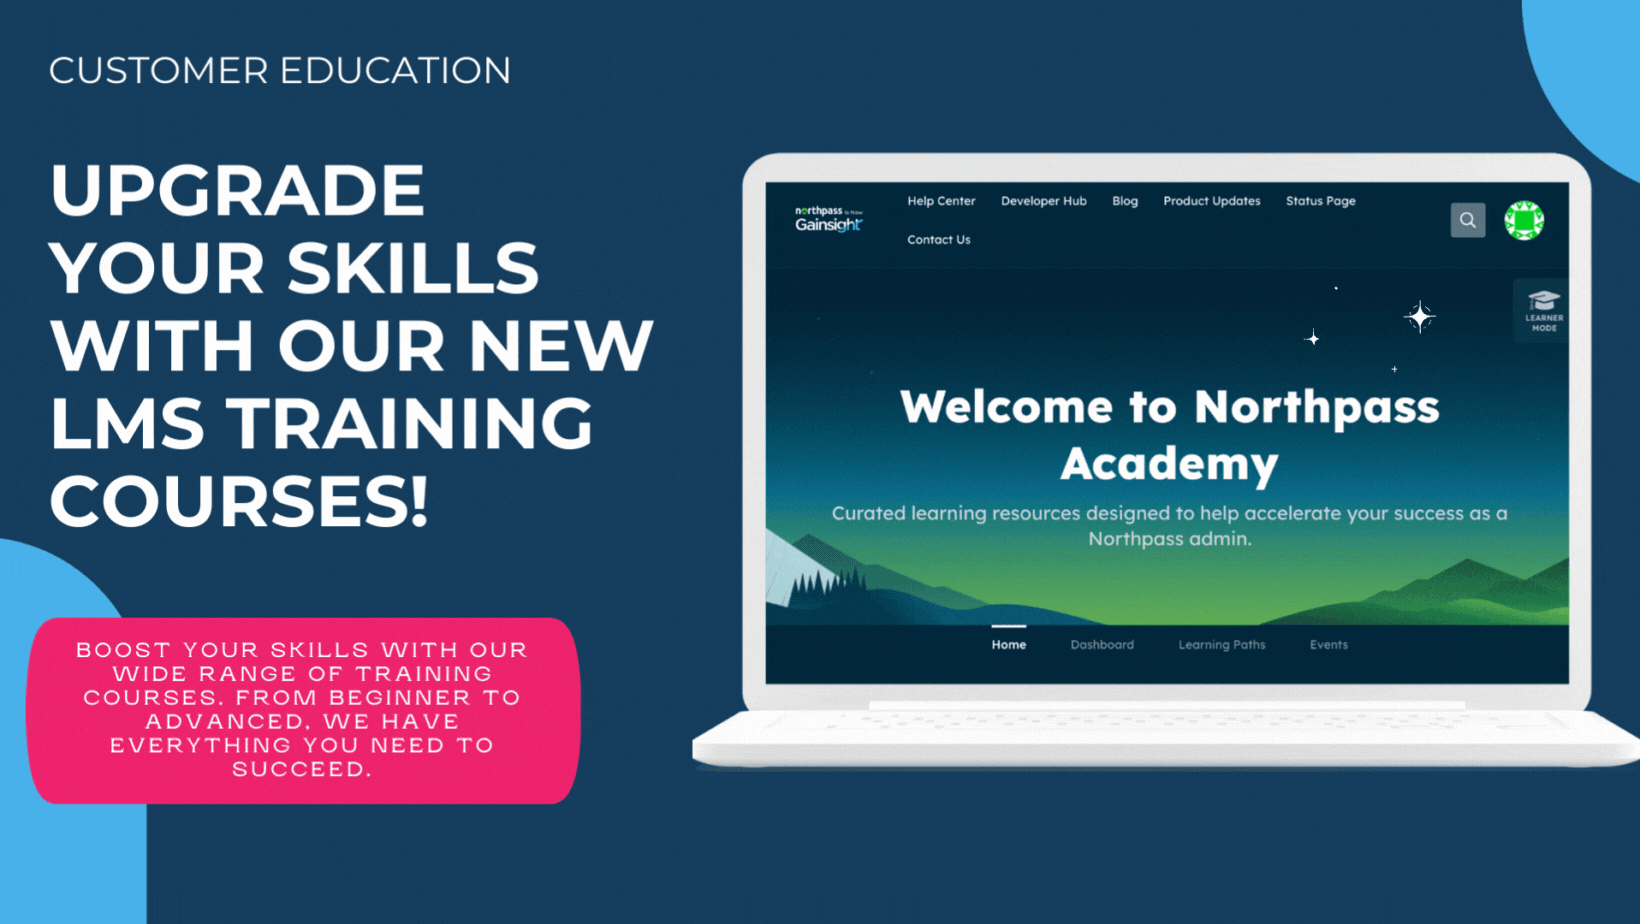 NEW! Customer Education (CE) Training Available on Northpass Academy